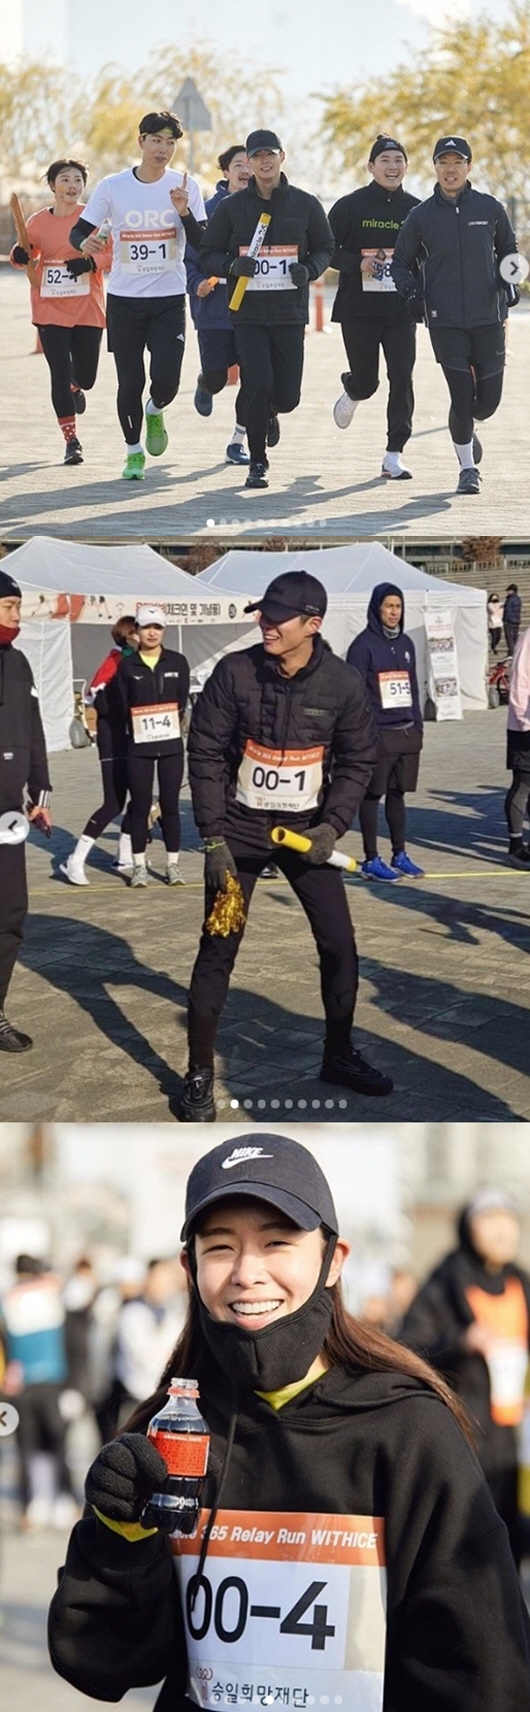 Singer Sean, actors Sung Hoon, Park Bo-gum, Kyung Soo-jin, and mixed martial arts player Kim Dong-Hyun participated in the lead.Sean said on the 30th, Six people have become a team and have run for the first time in Korea to build the Lou Gehrig Hospital.They participated in the Miracle365X Weed Ice Relay Run at the Ttukseom Amusement Park in Jayang-dong, Gwangjin-gu, Seoul at 8 am on the same day.Miracle 365X Weed Ice Relay Run was held by the Seungil Hope Foundation for the establishment of the Lou Gehrig Hospital.Sean said, Park Bo-gum runs 2km as the first runner, 10 kicks, 3 runners Sung Hoon runs 2km, throws a water bottle with half water, 4 runners Kyung Soo-jin runs 2km, Coca-Cola 300ml one shot, 5th runner Kim Dong-Hyun runs 2km and 6 runners all run. I delivered the table tennis ball from 1 to 6 with the rhythm, and I ran 2km to 7 minutes and 50 seconds as the last runner.Everyone ran their best, he said.Sean, Park Bo-gum, Kyung Soo-jin, Kim Dong-Hyun, etc. in the photo are laughing brightly in cold weather and participating in good deeds.Photo: Sean Instagram